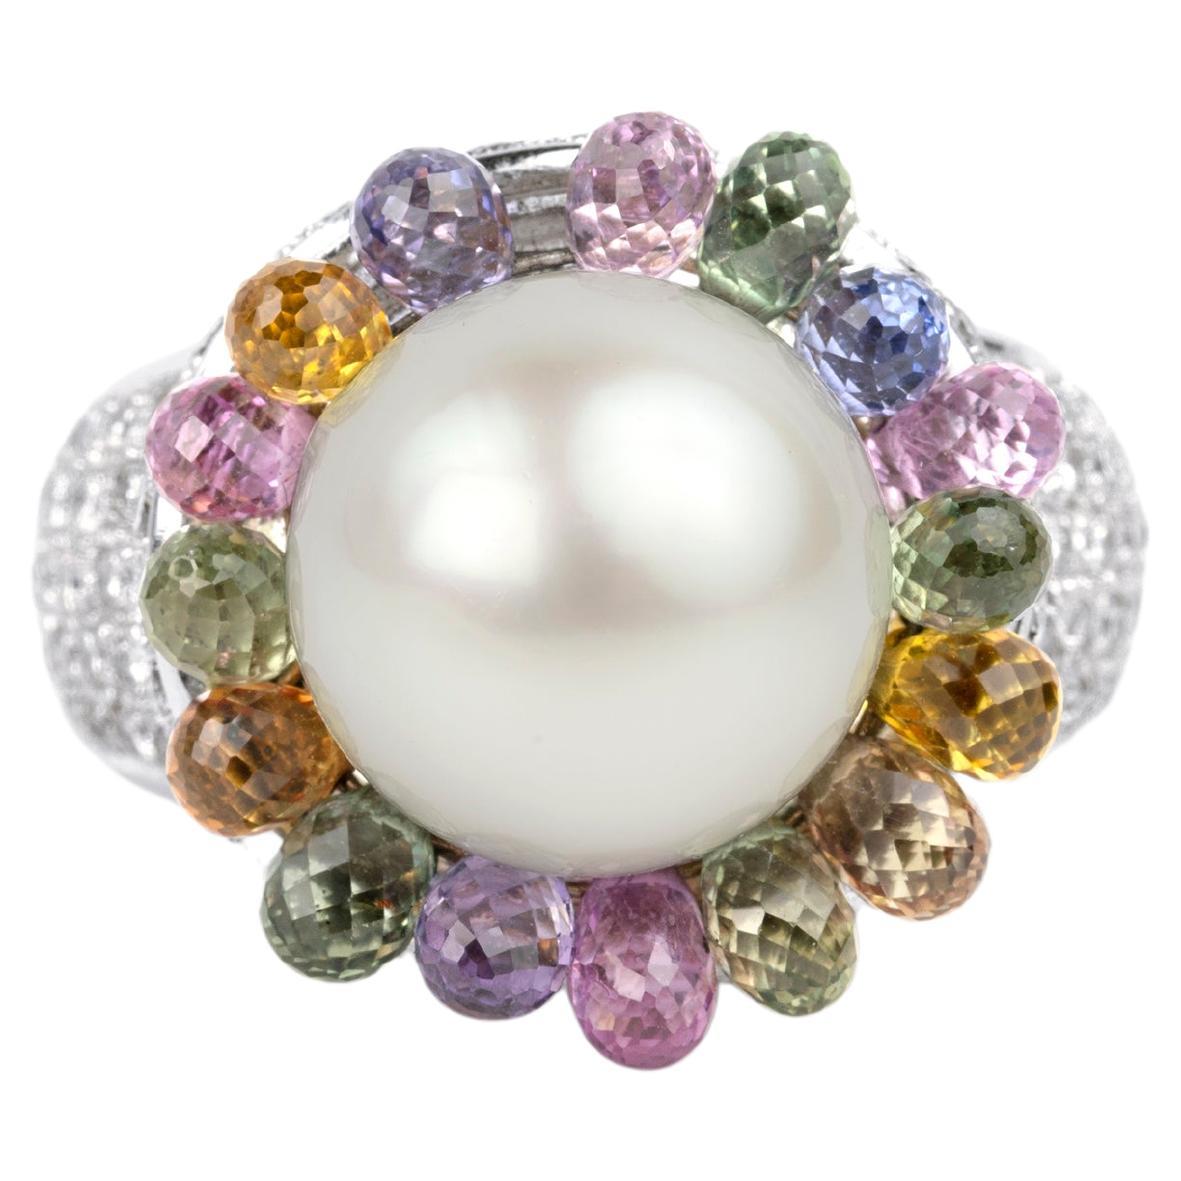 South Sea Pearl Multi Sapphire and Diamonds Statement Cocktail Ring in 18k White